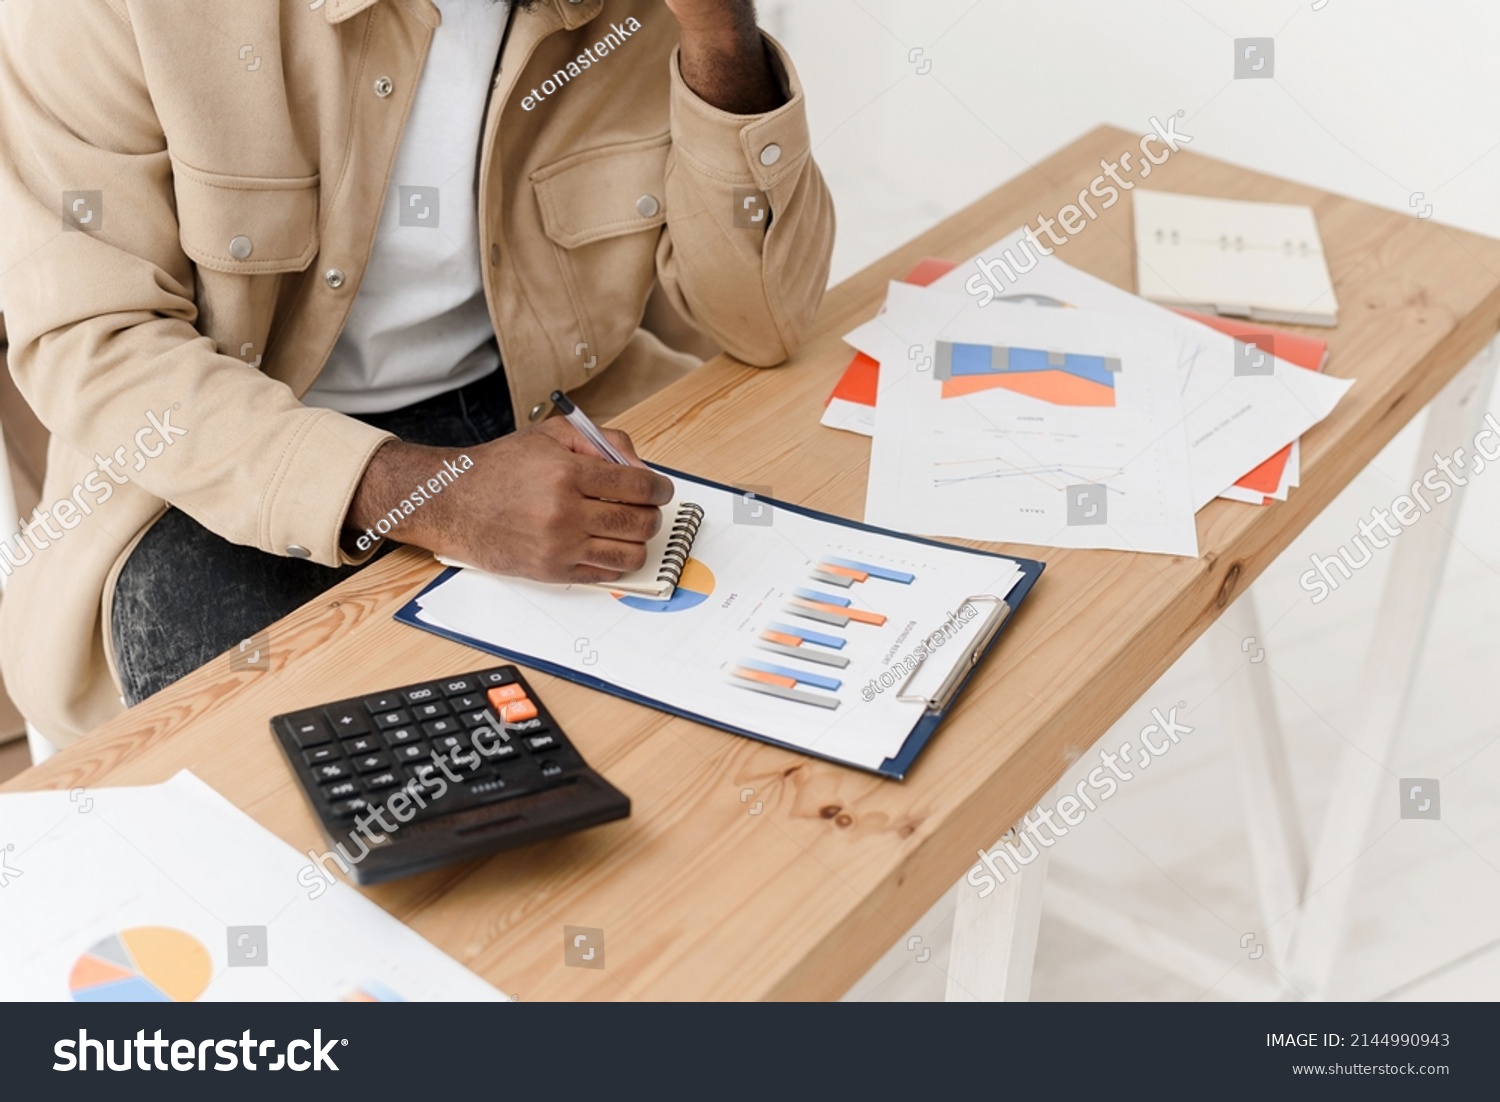 Close-up of an African American man calculating with a calculator, managing household finances, or keeping company financial records at home. Black man making calculations on a calculator, paying #2144990943